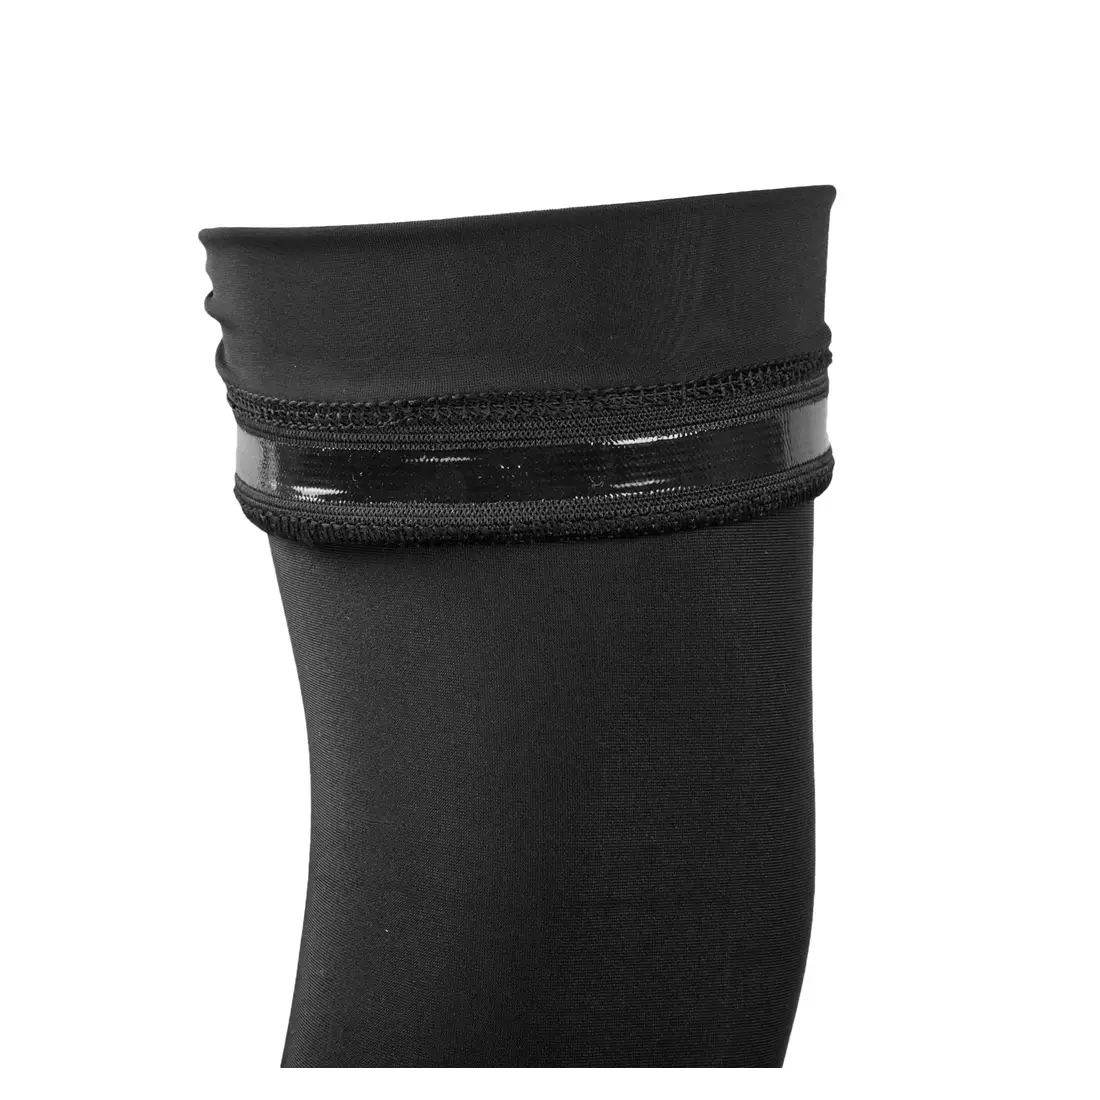 MikeSPORT - uninsulated cycling sleeves 2014W